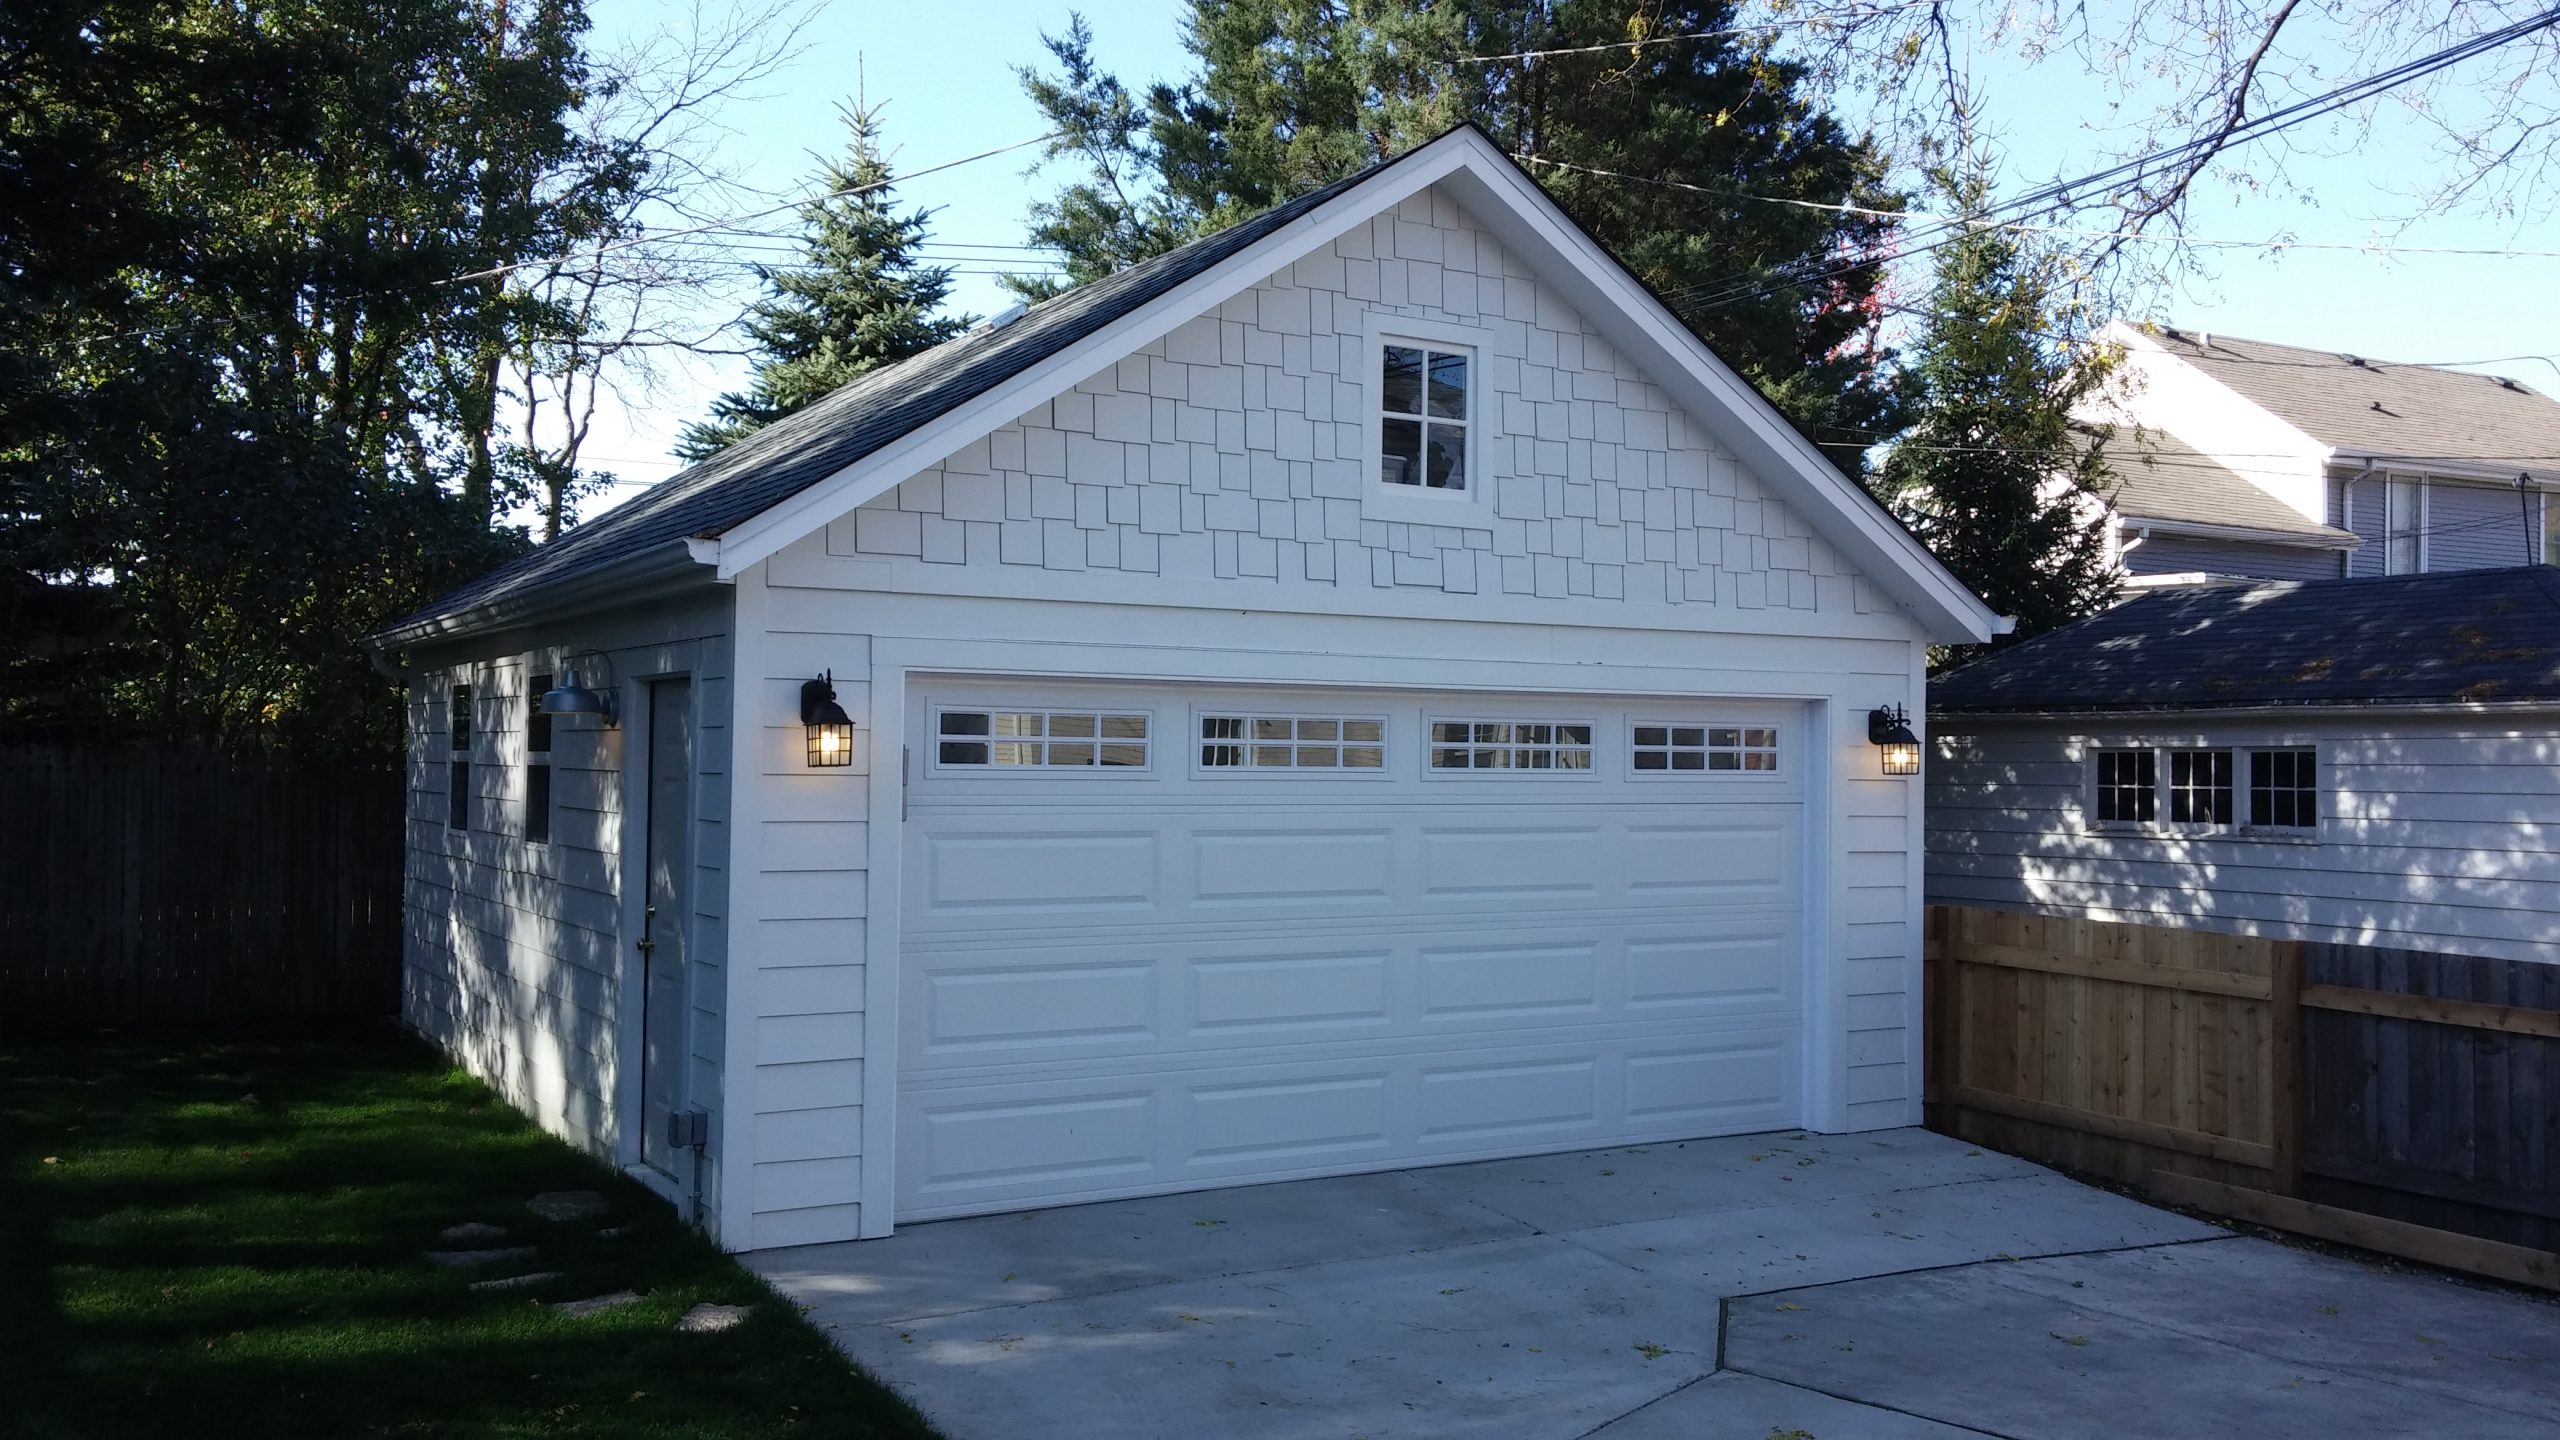 RYAN PARKS OAK PARK CUSTOM CEMENT BOARD SIDING DOORS TRIM GABLE ENDS WITH ATTIC STORAGE AND STAIRS  (8) (1)